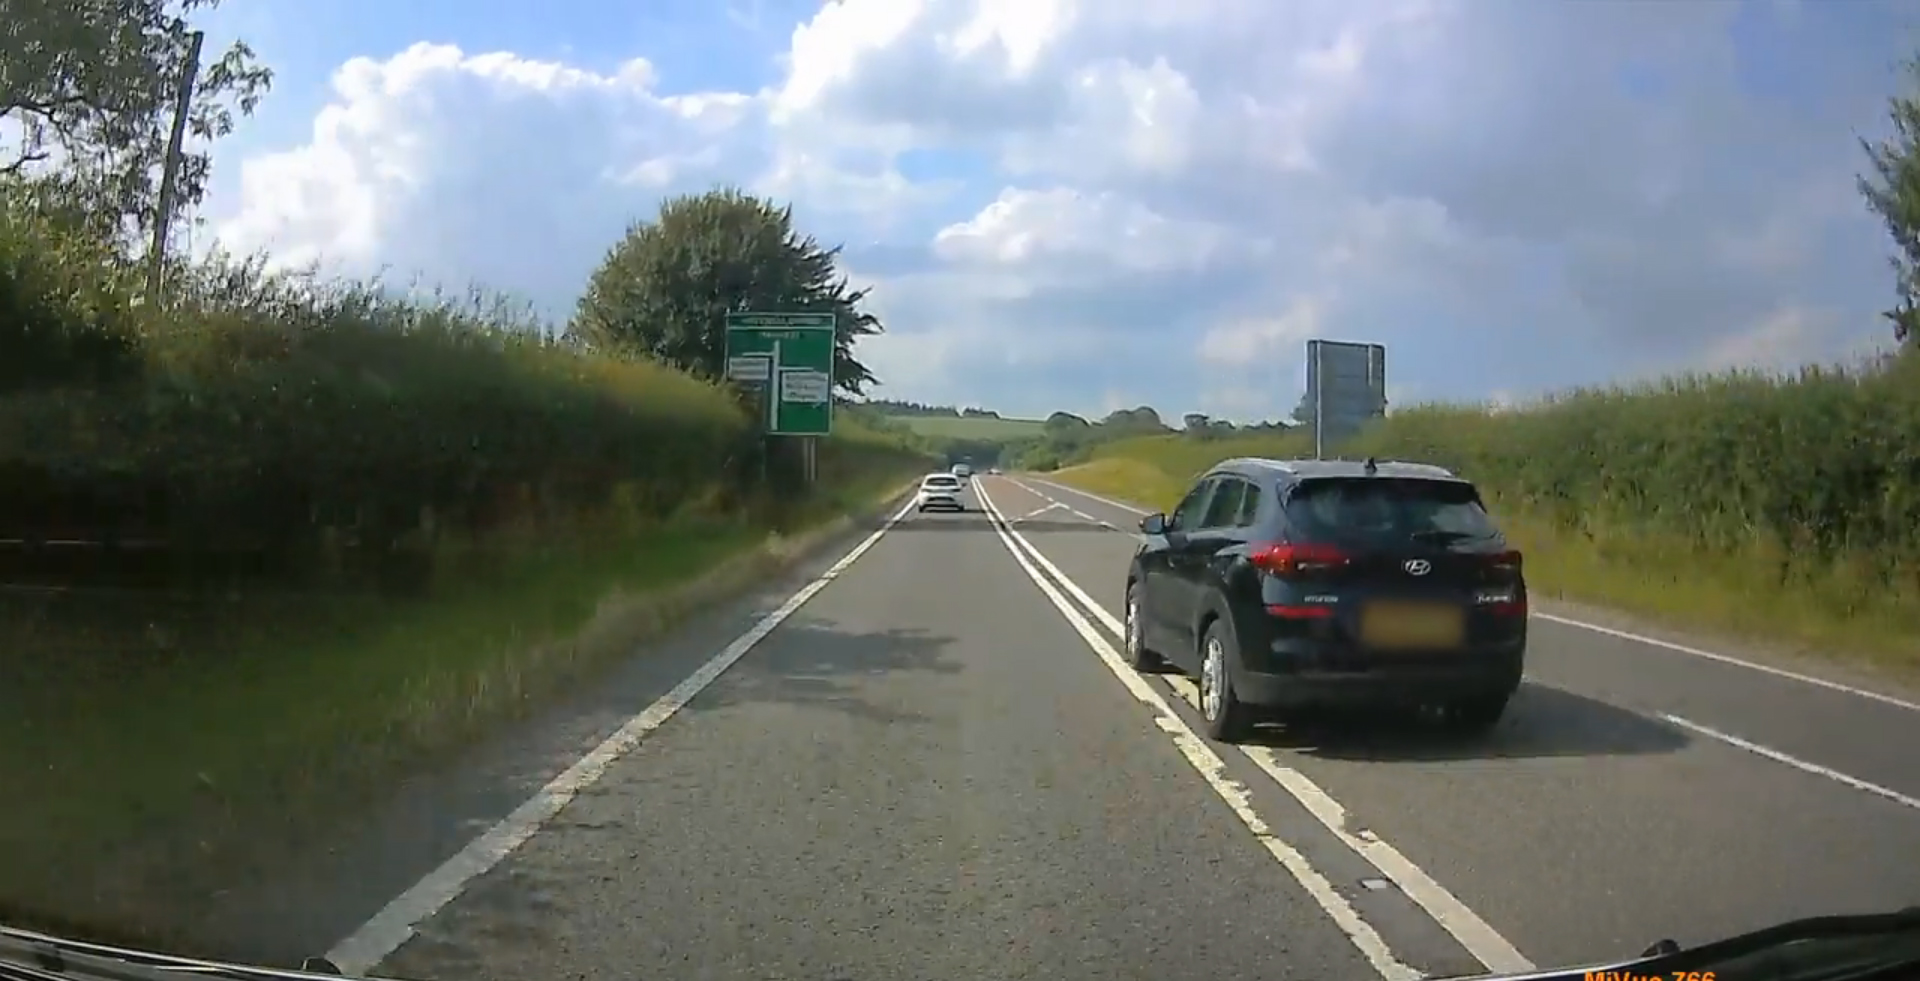 This motorist was caught on dashcam overtaking another car by crossing double white lines (Dorset Police/PA).